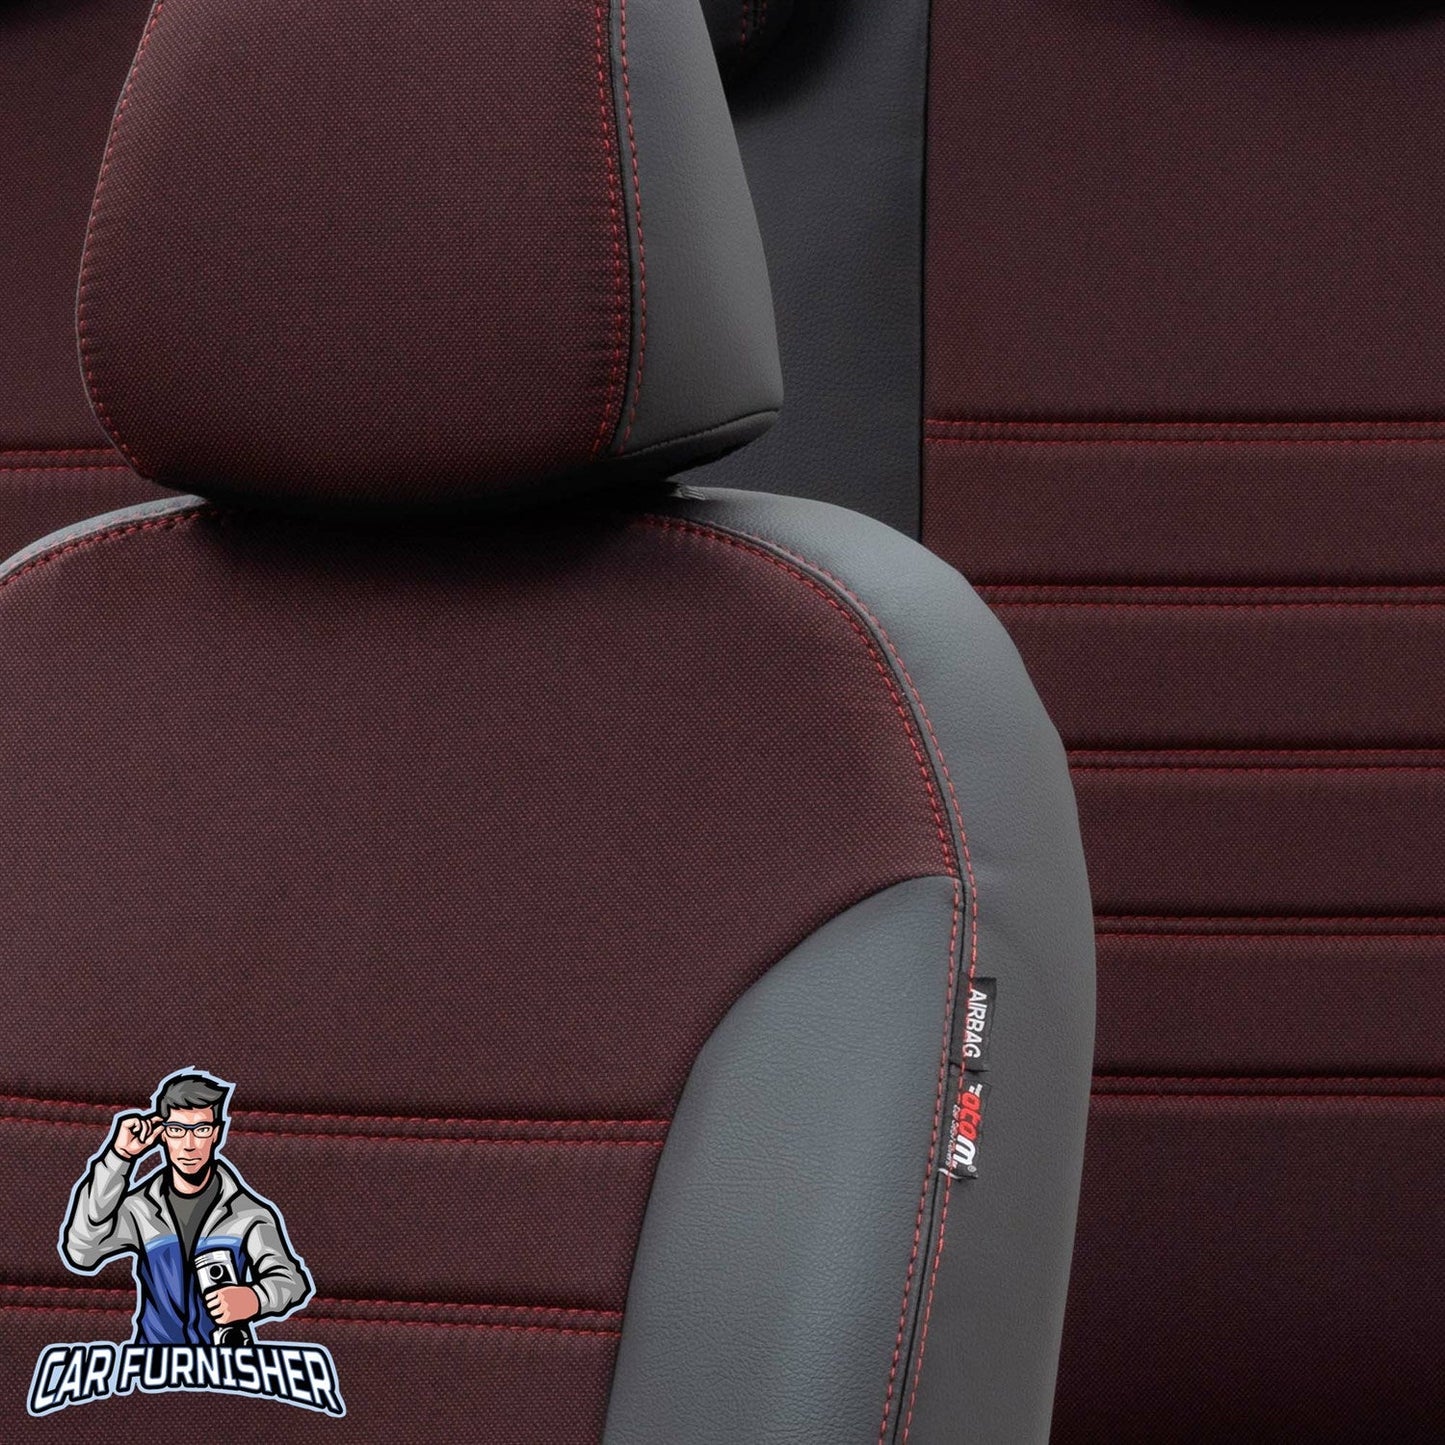 Toyota Avensis Seat Cover Paris Leather & Jacquard Design Red Leather & Jacquard Fabric